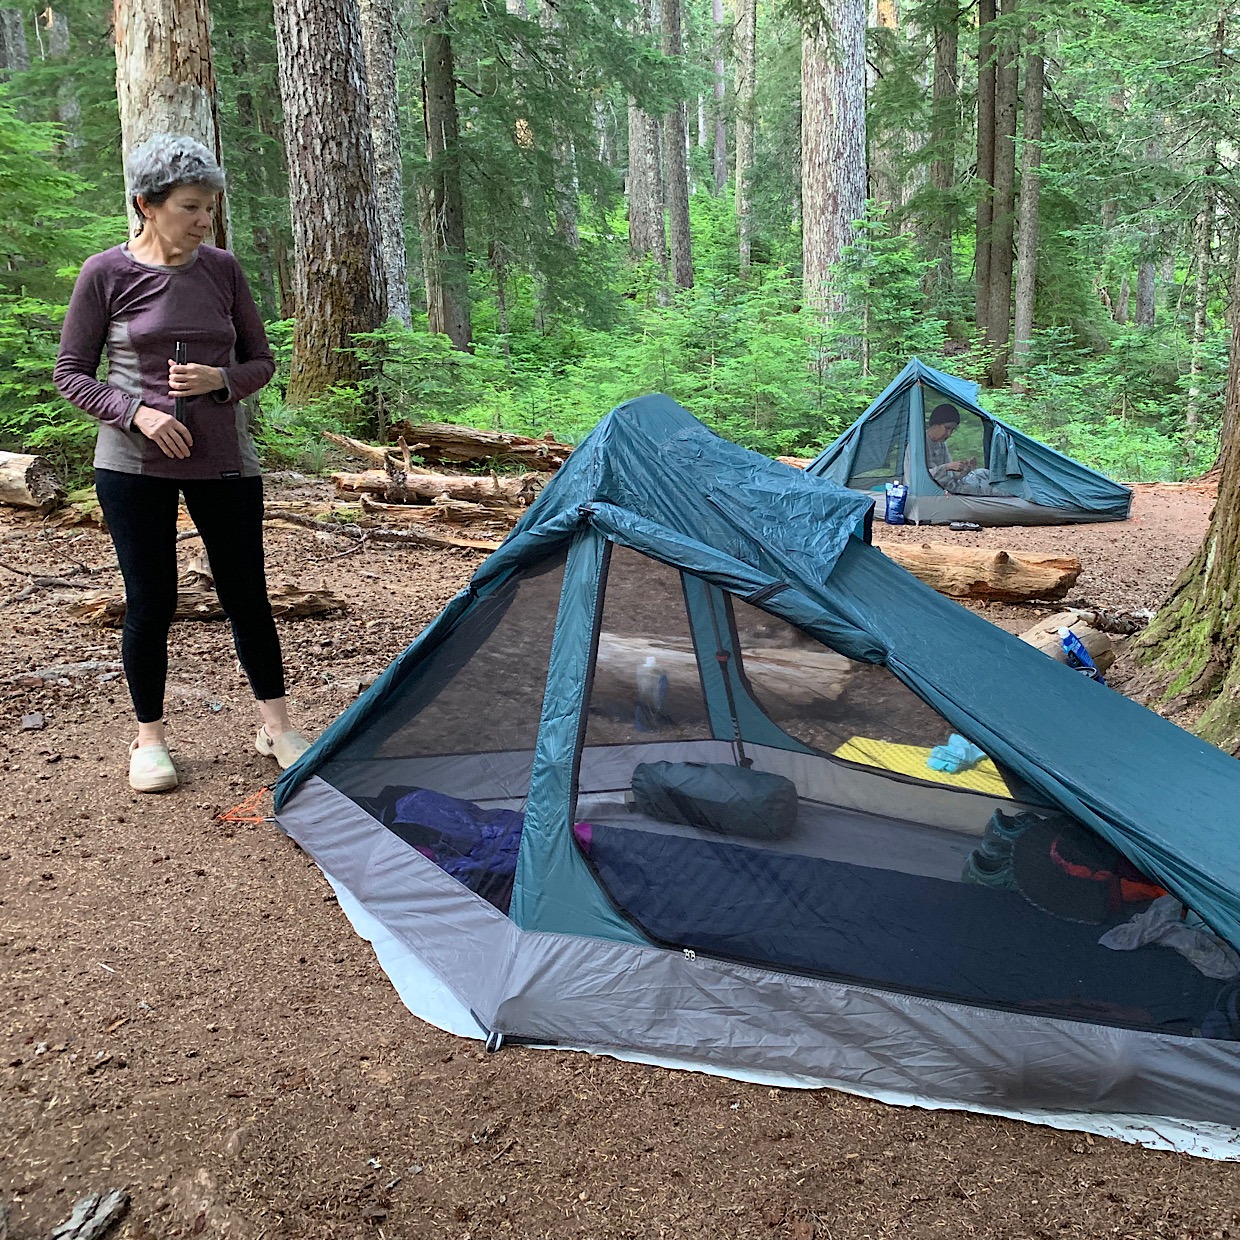 Judy met a guy with a much lighter tent while hiking the Appalachian Trail and it was not a "coffin" but rather, a palace. That just pissed her off, so she went designed her own ultralight palace.